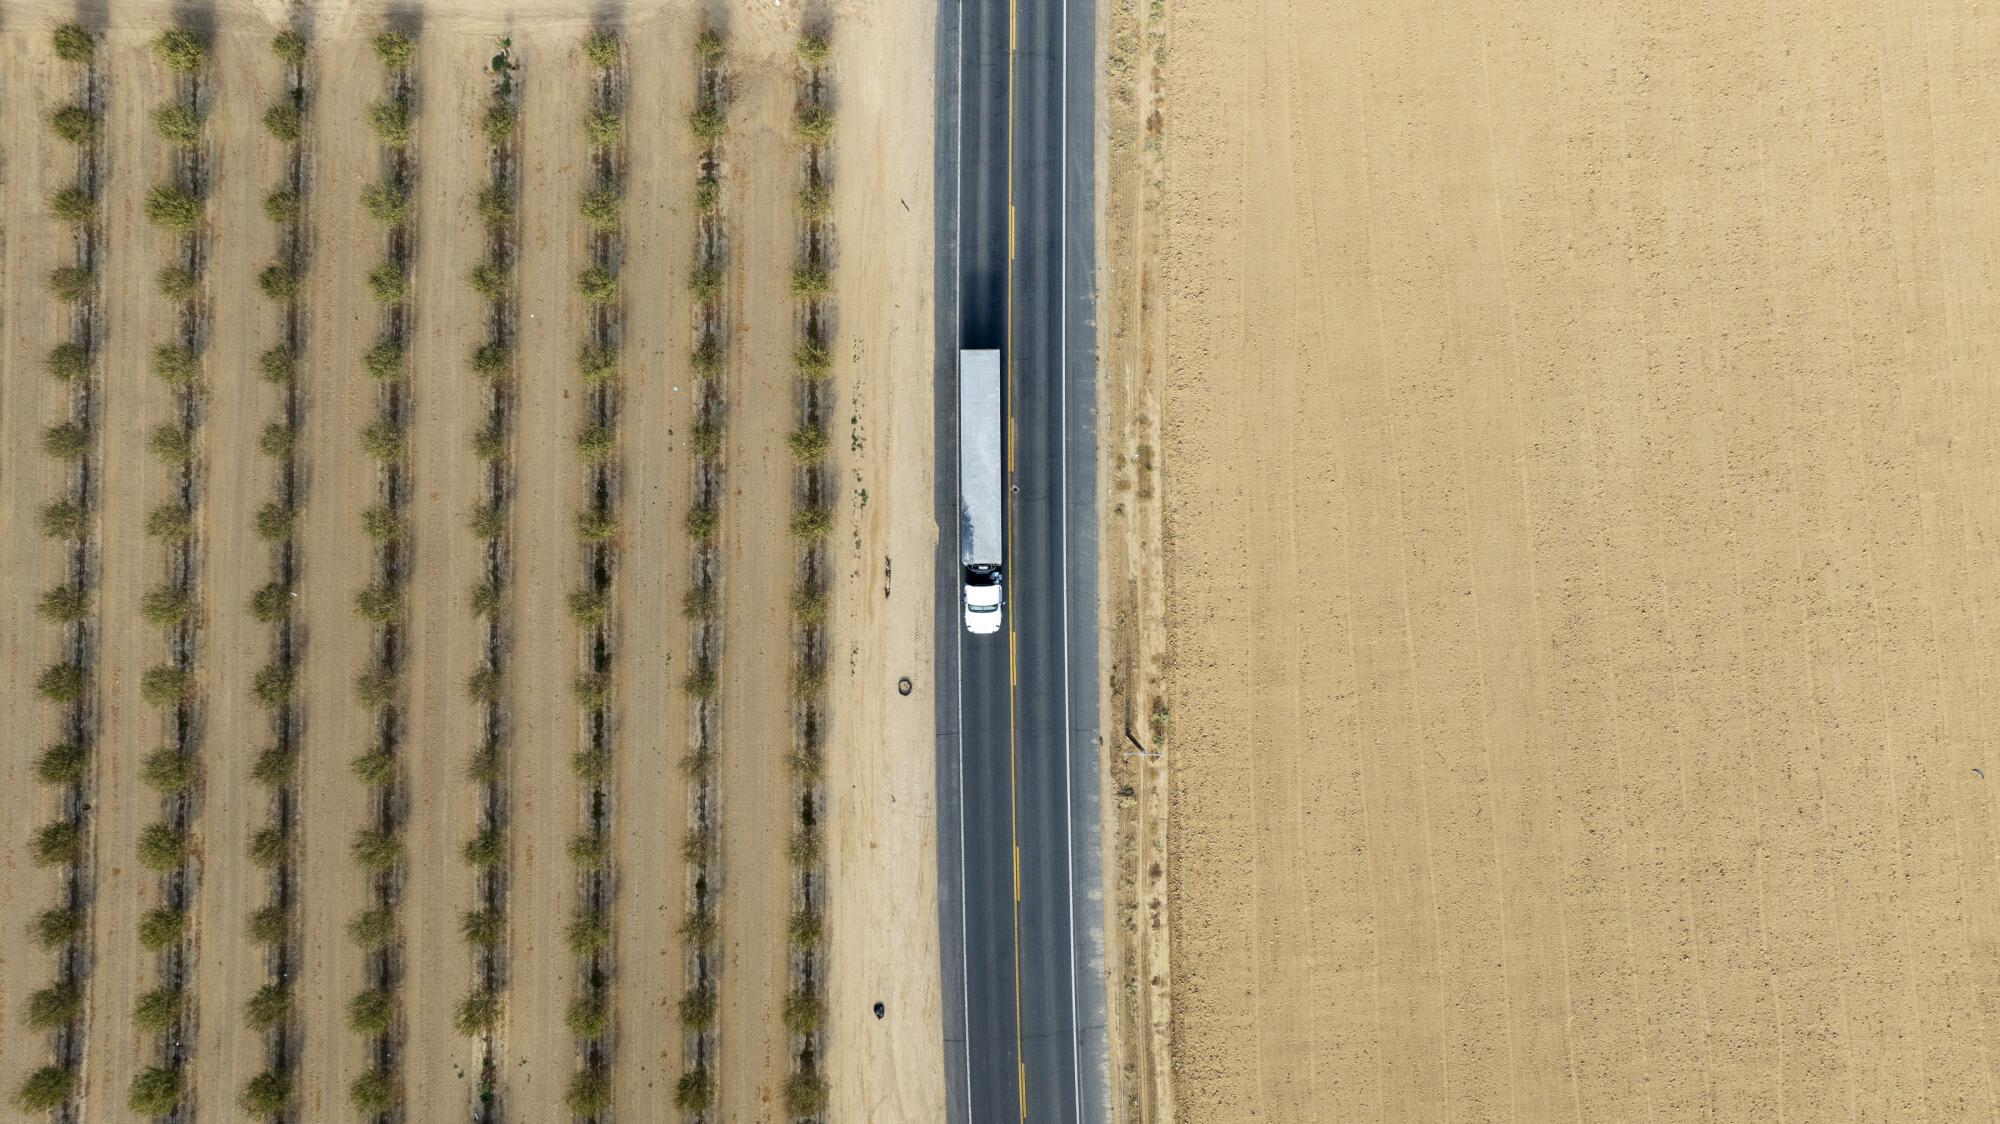 In an aerial view, a tractor-trailer is on a road in a rural area.